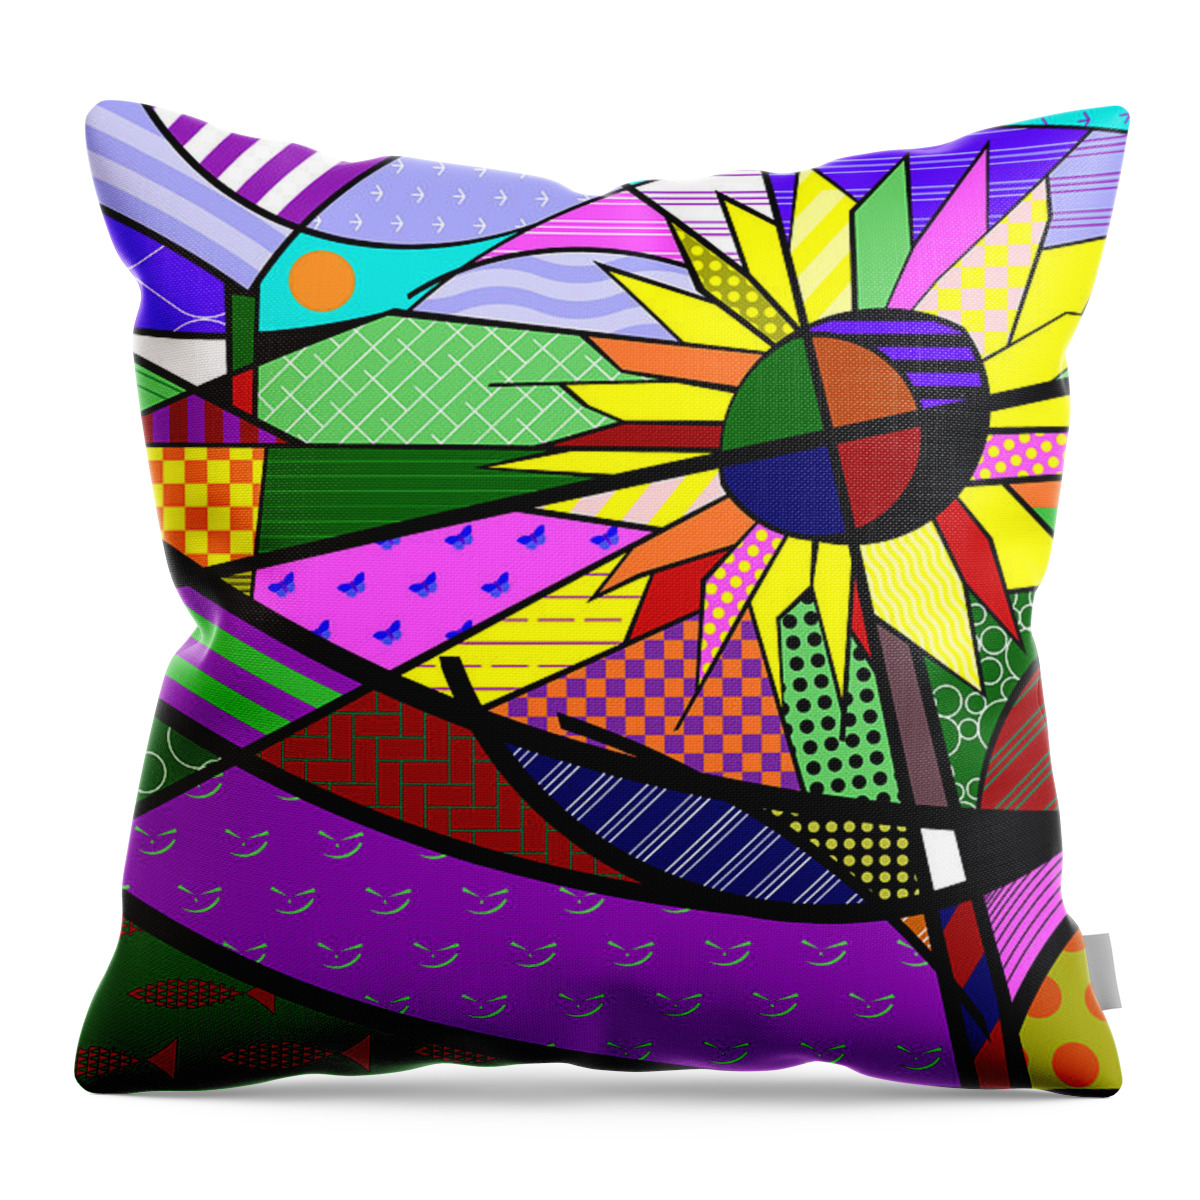 Colorful Throw Pillow featuring the digital art Sunflower Farm by Randall J Henrie